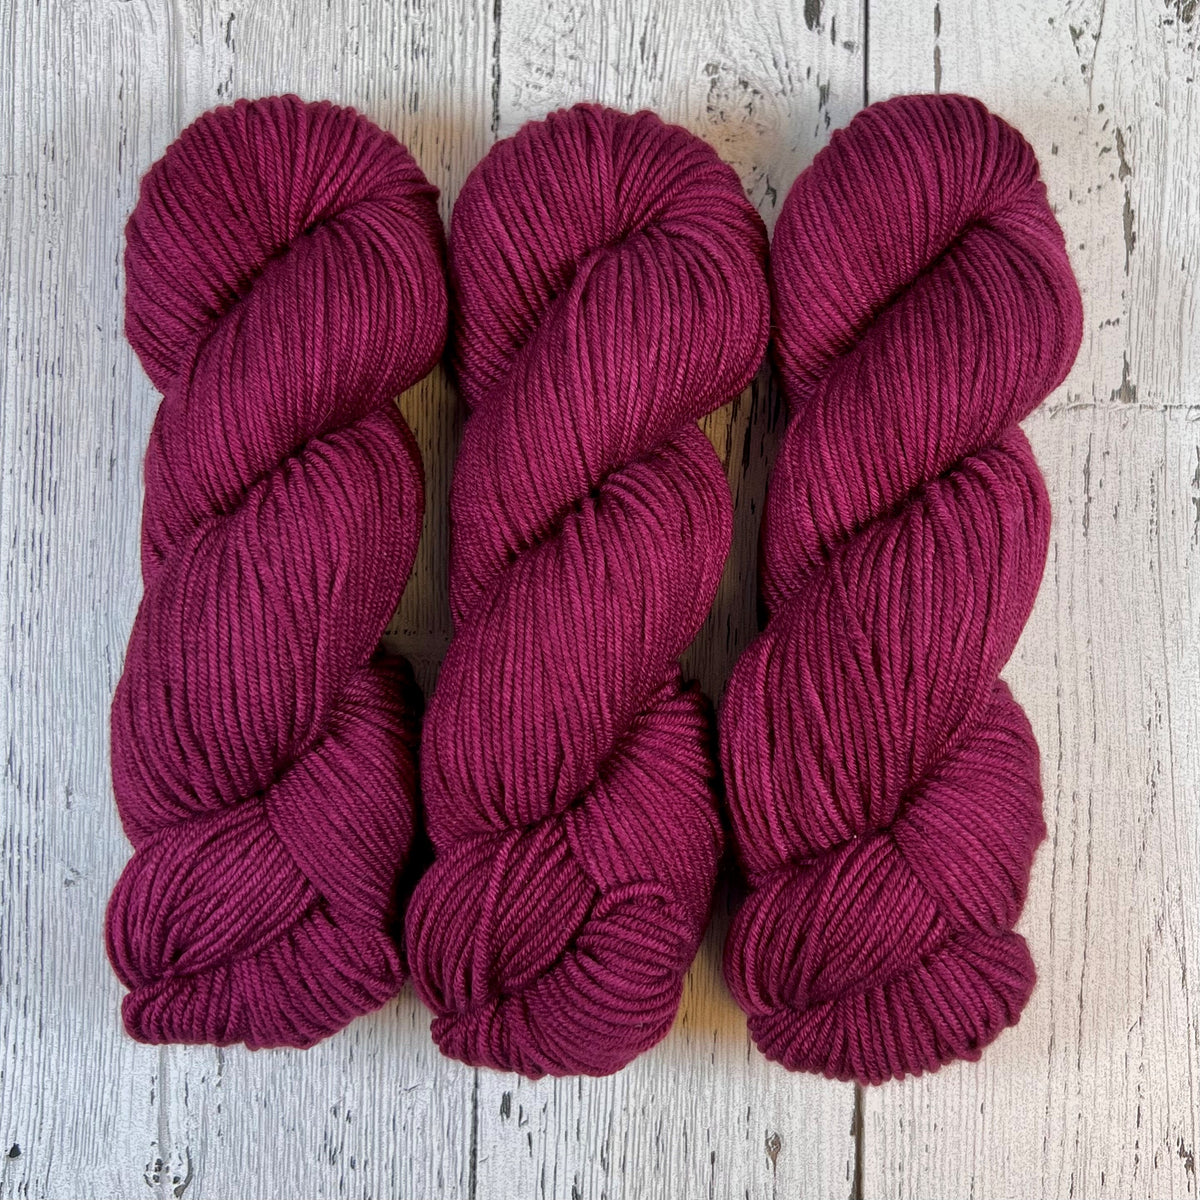 Contented Grapes - Fioritura Worsted - Dyed Stock